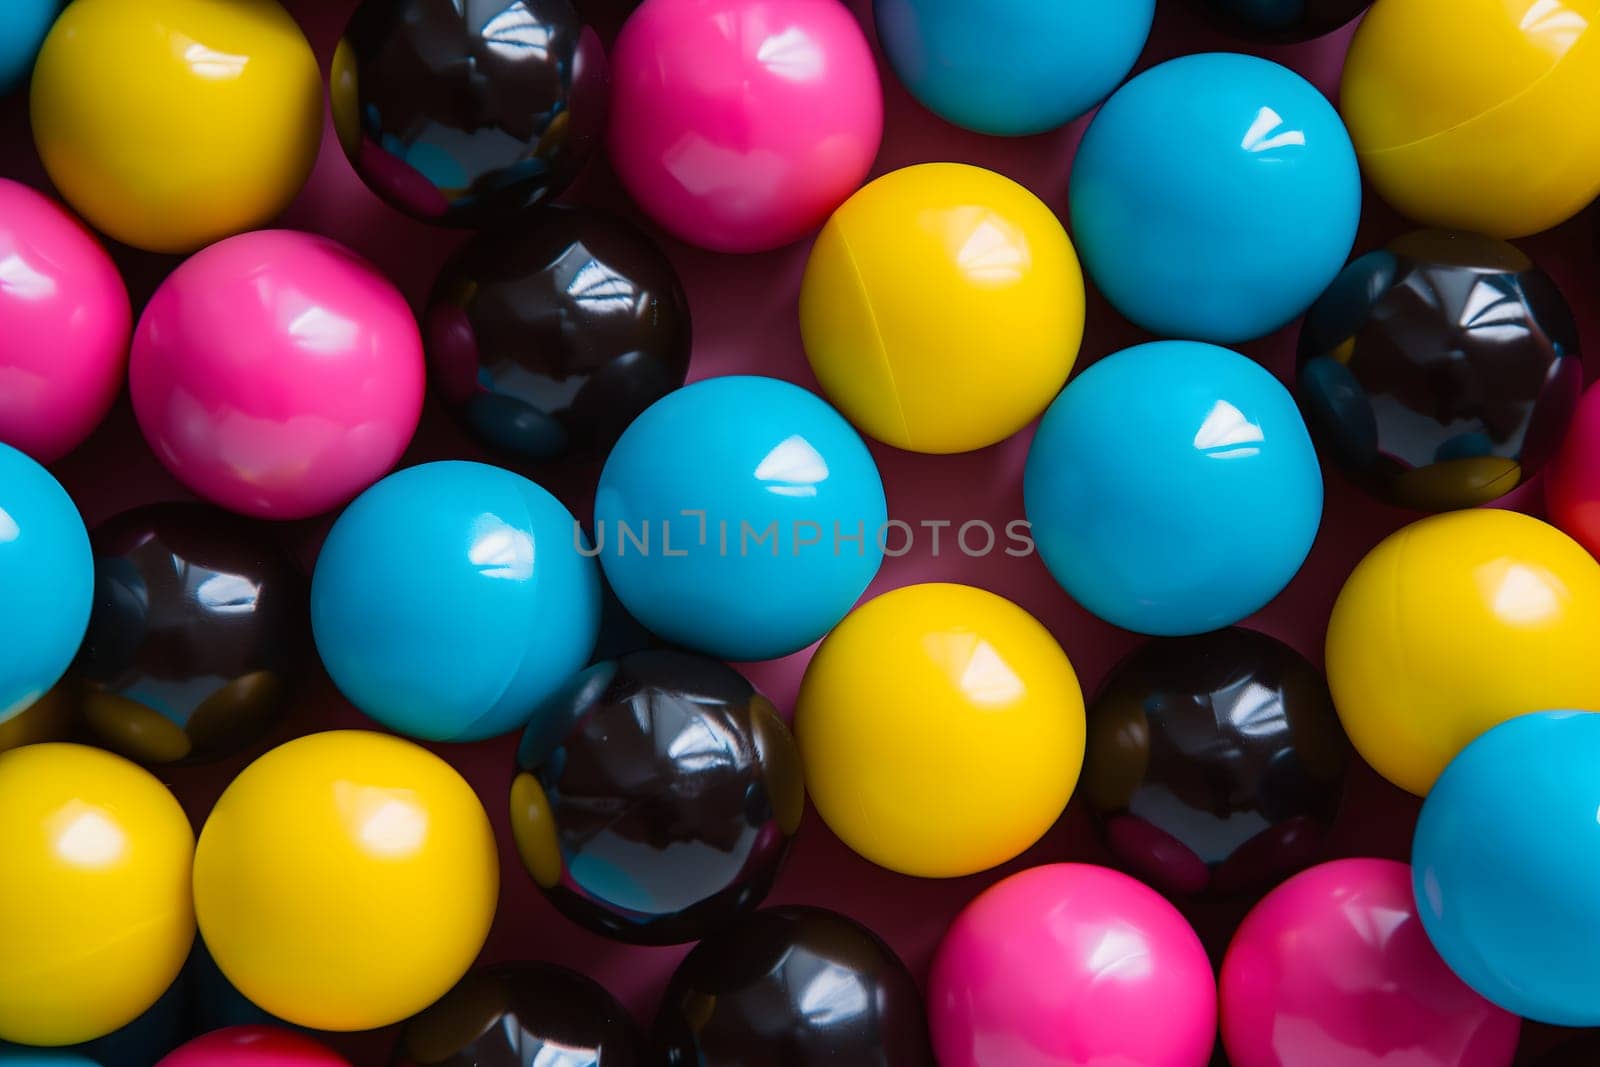 Full-frame background of piled colorful plastic balls by z1b